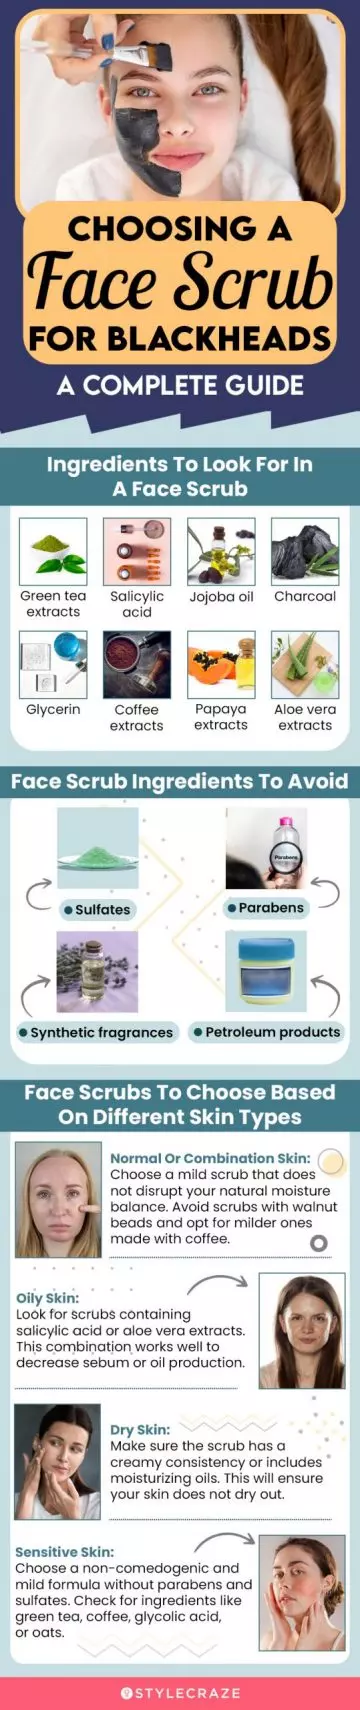 Choosing A Face Scrub For Blackheads: A Complete Guide (infographic)